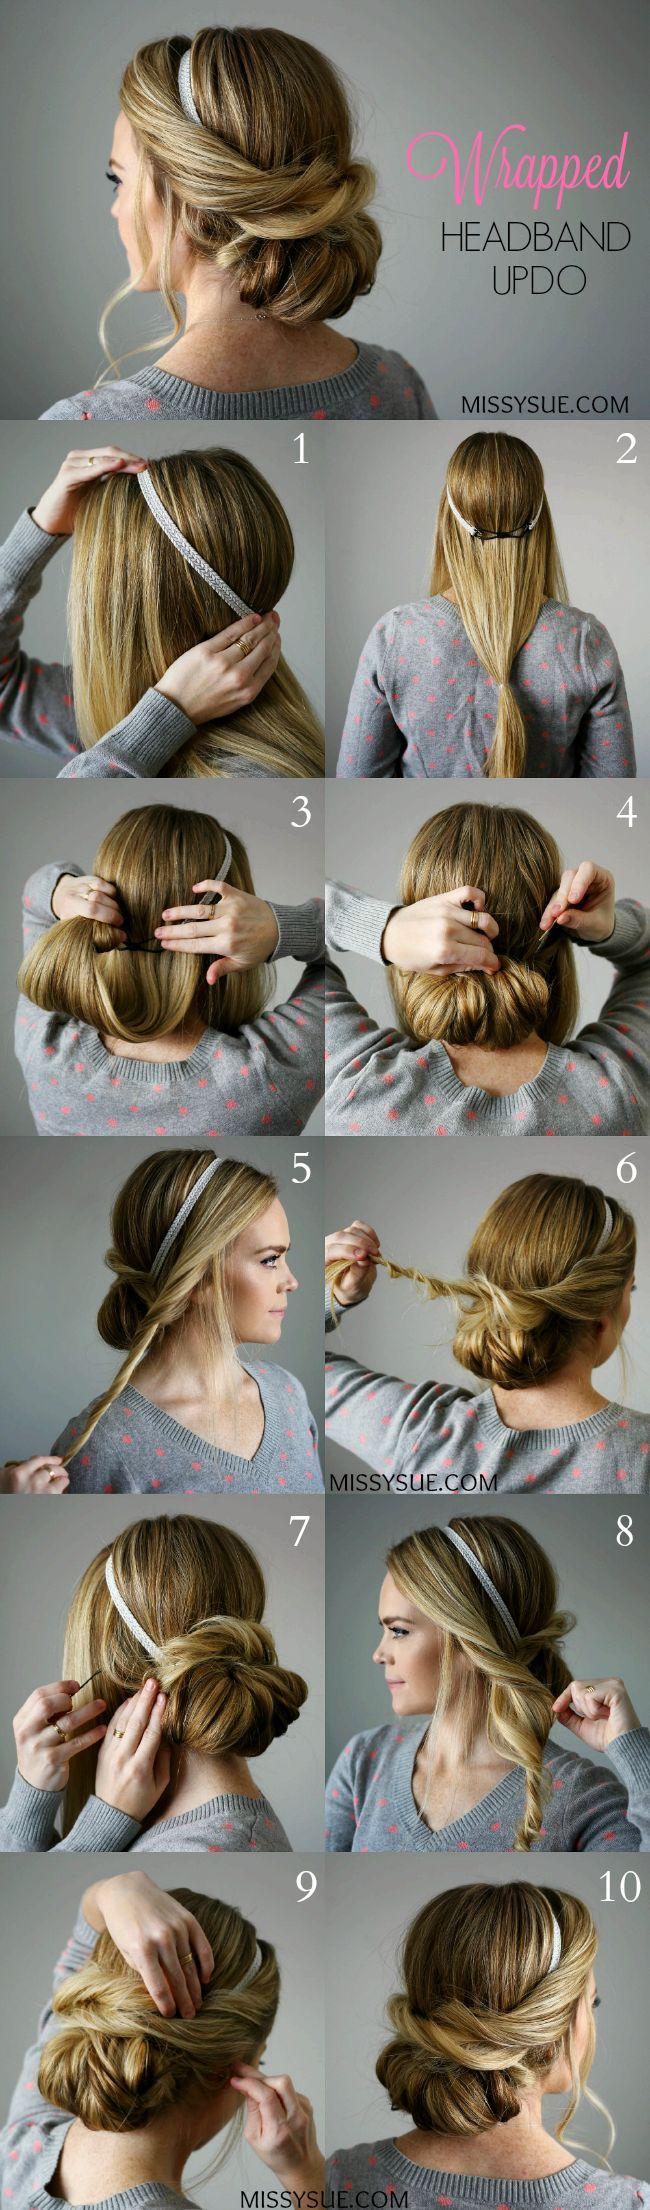 Wedding - 25 Step By Step Tutorial For Beautiful Hair Updos